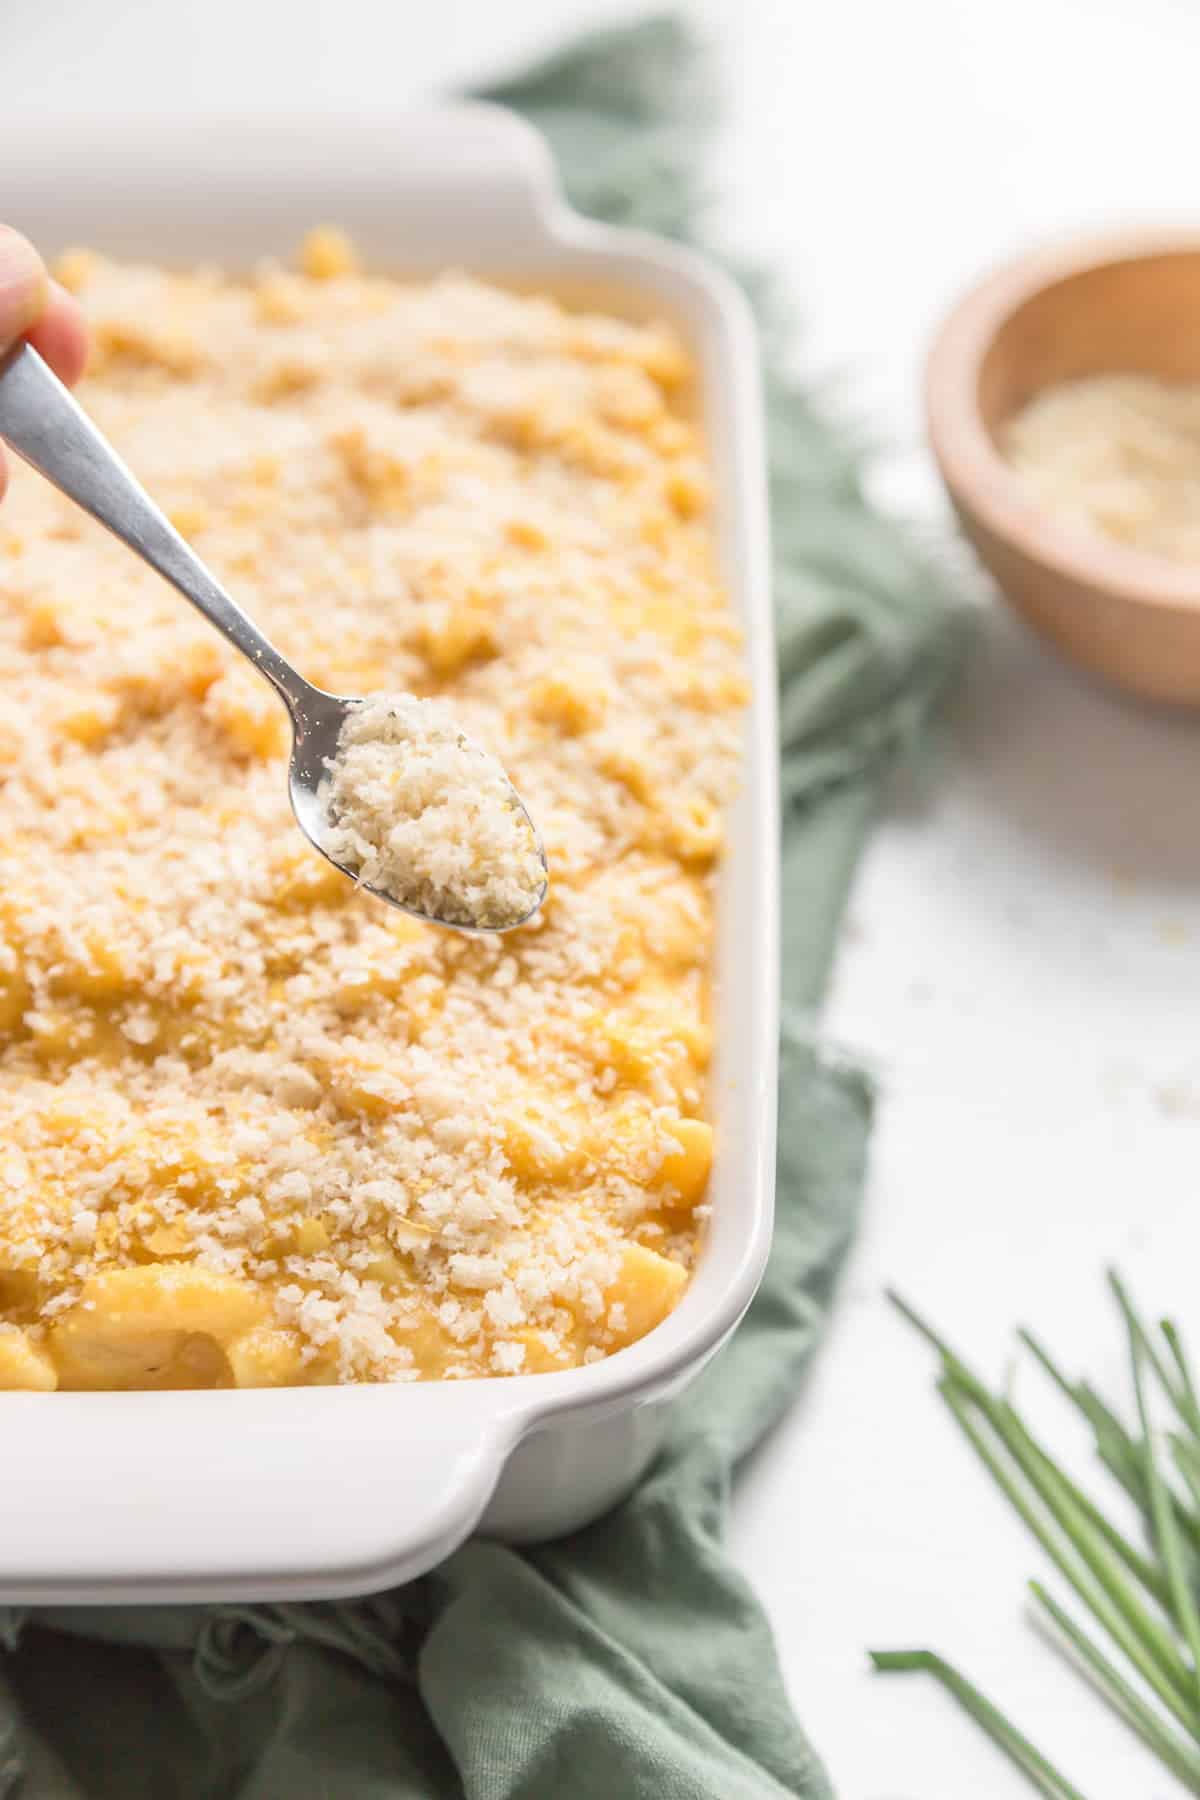 Breadcrumbs being sprinkled onto a vegan mac and cheese in a white casserole dish.